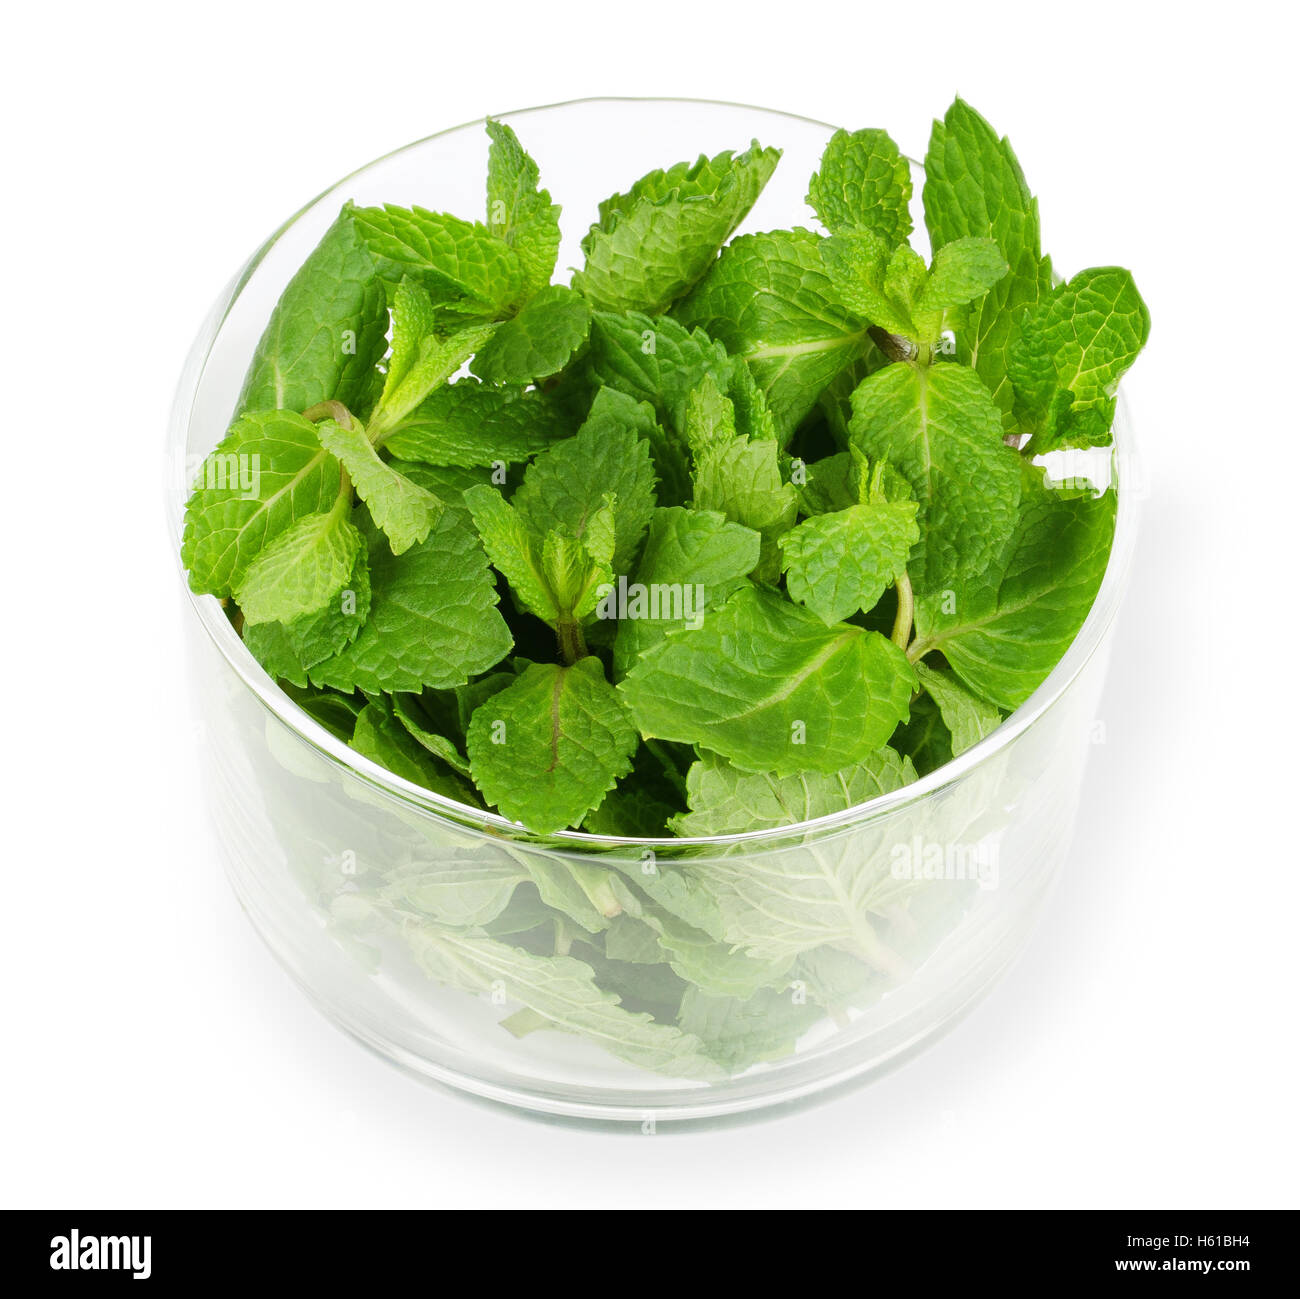 Fresh peppermint leaves in glass bowl on white background. Green Mentha piperita is an edible herb. Stock Photo